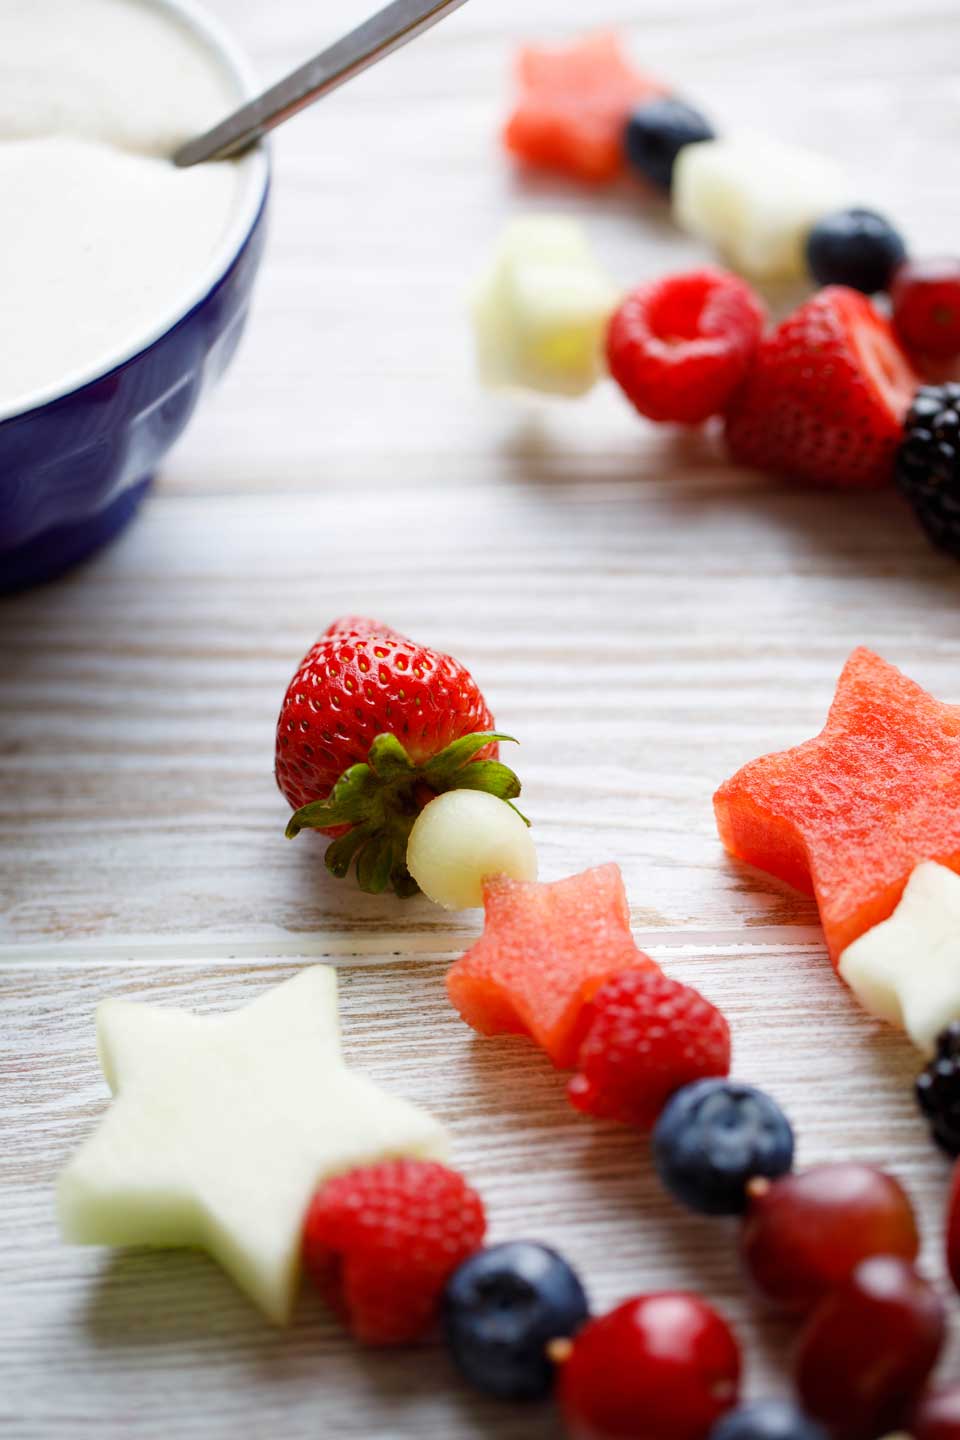 Easy and fun as appetizers or dessert! With our quick tips, you can serve Red, White and Blue Fruit Kabobs as a refreshing appetizer with sweet Yogurt Dip, or as a light but decadent dessert with cake and Chocolate Lava Dip! Plus fun serving ideas, too! Make these for all your summer picnics and BBQs ... from Memorial Day to 4th of July to Labor Day! #picnic #patriotic #redwhiteandblue #fruit #kabobs #appetizer #healthy #dessert #partyfood #4thofJuly #fourthofjuly | www.TwoHealthyKitchens.com